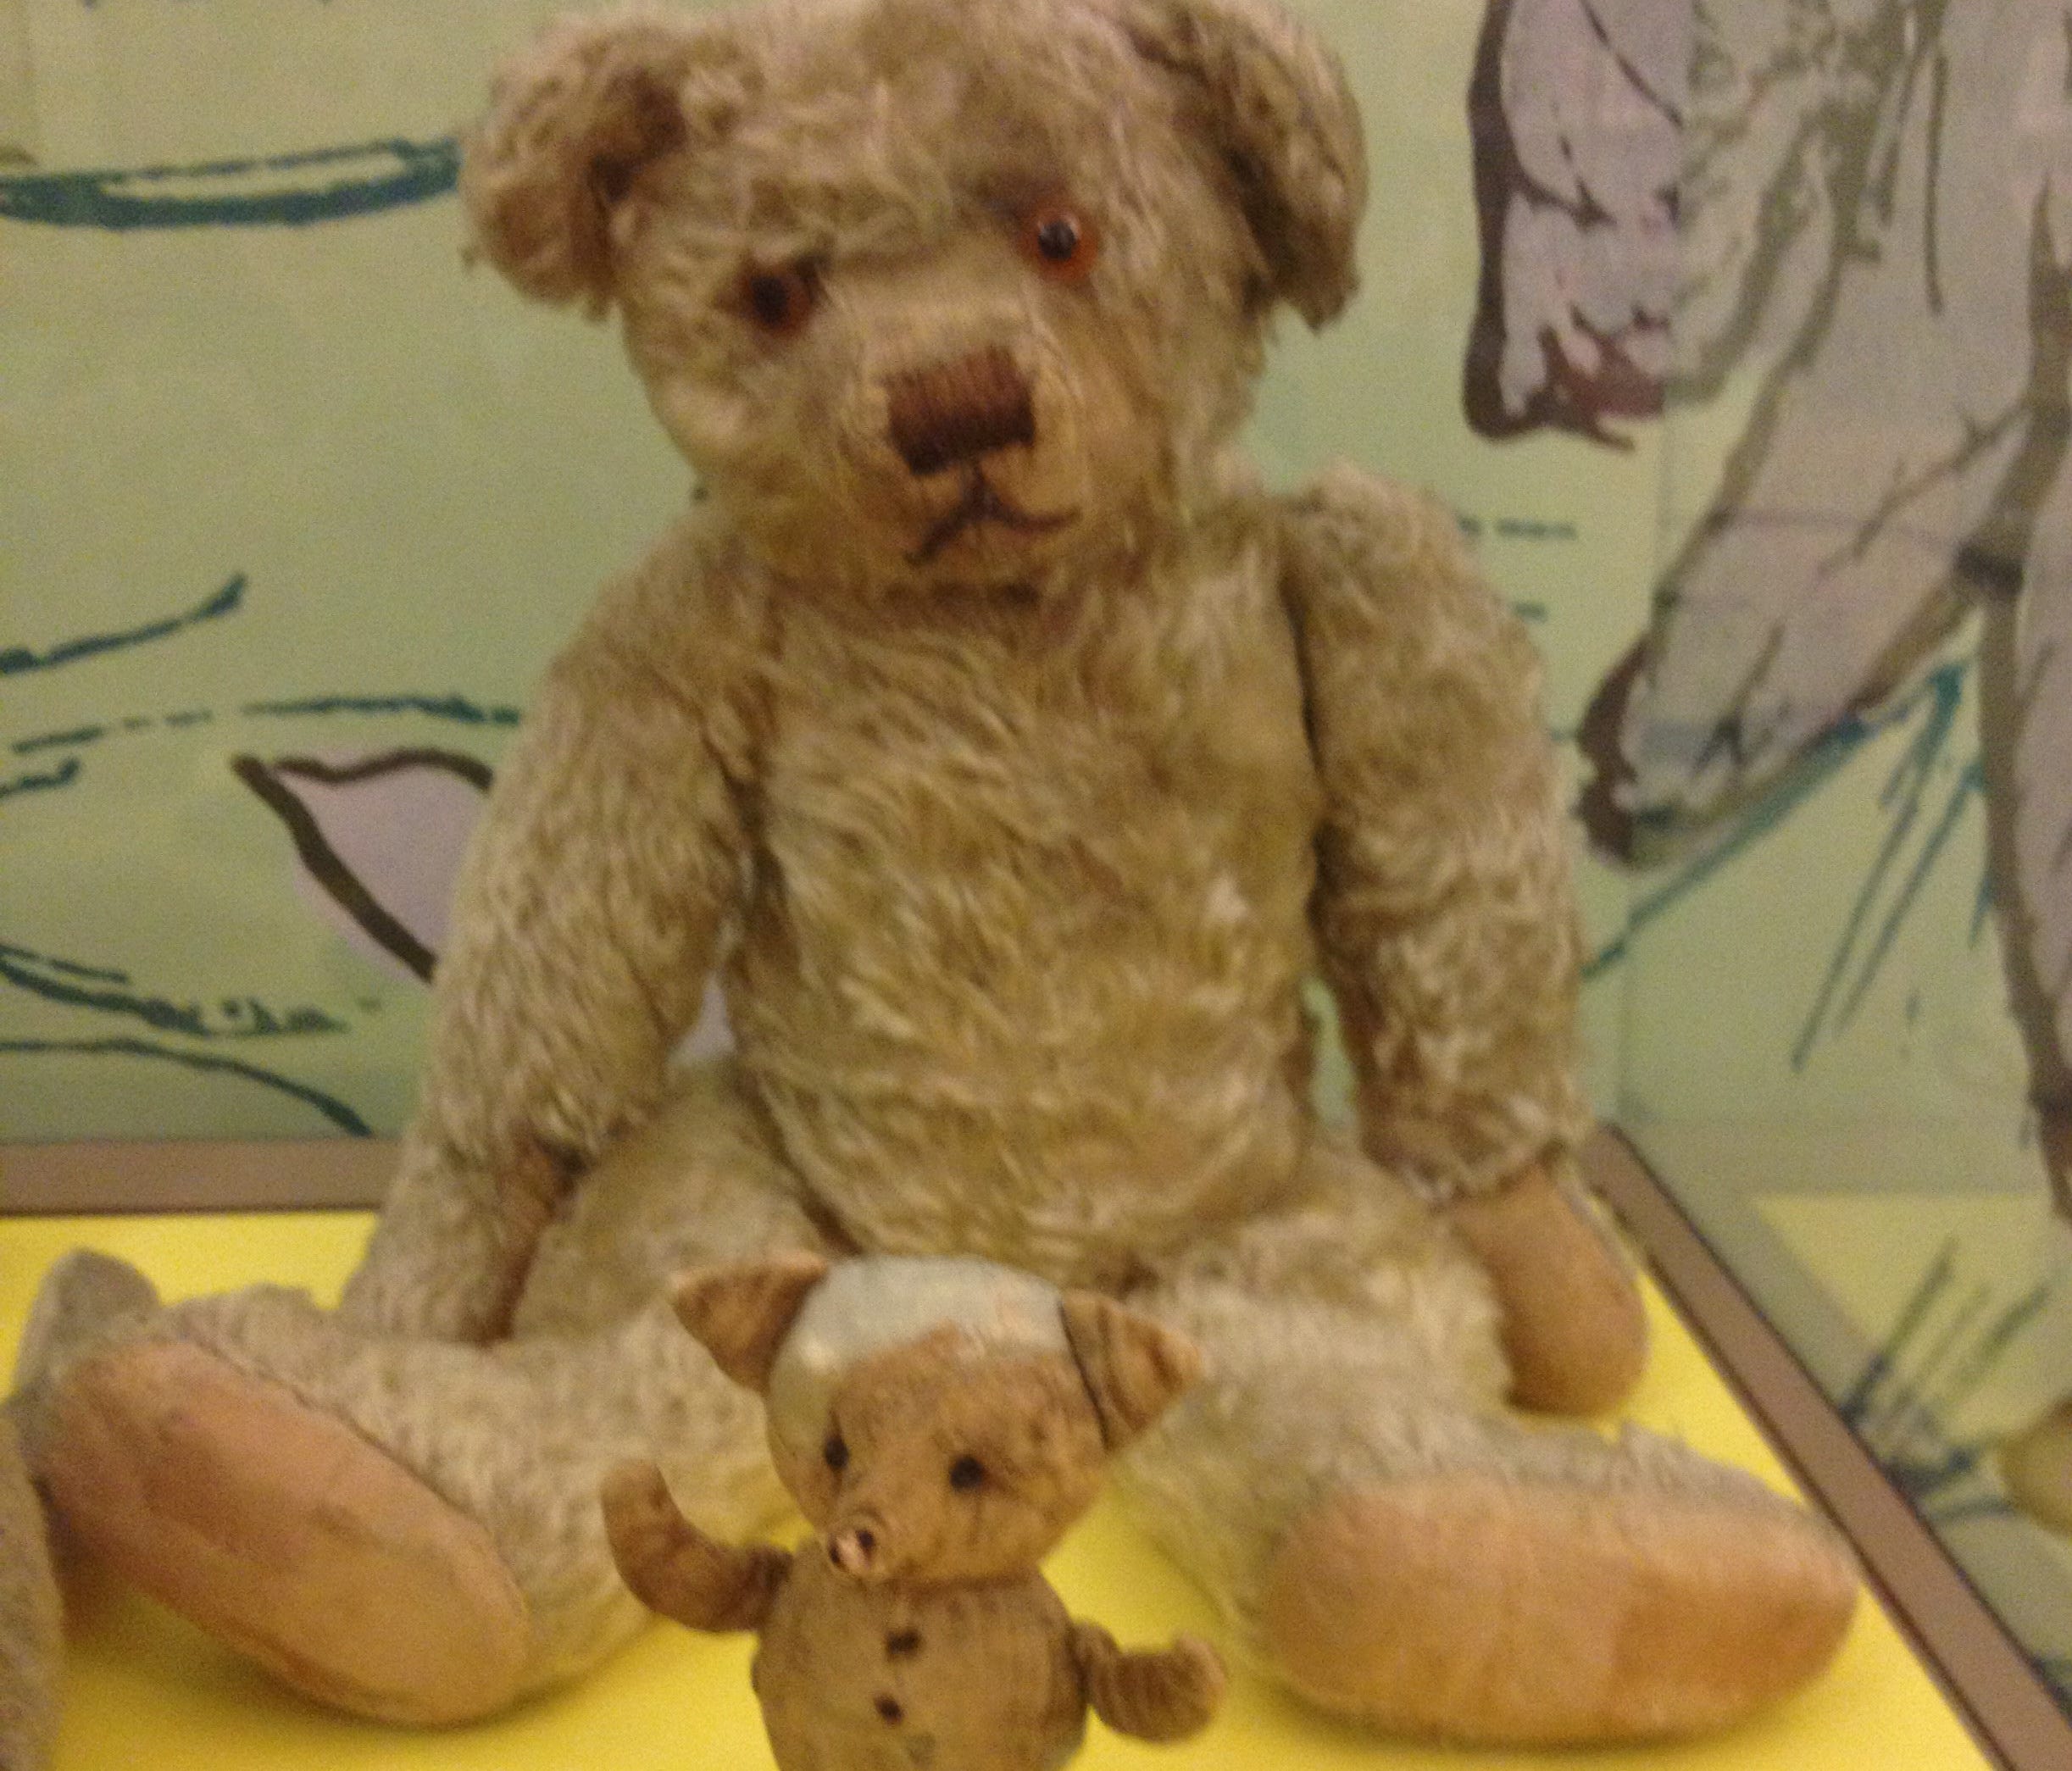 The real, much-loved Winnie-the-Pooh, with his tiny pal, Piglet.